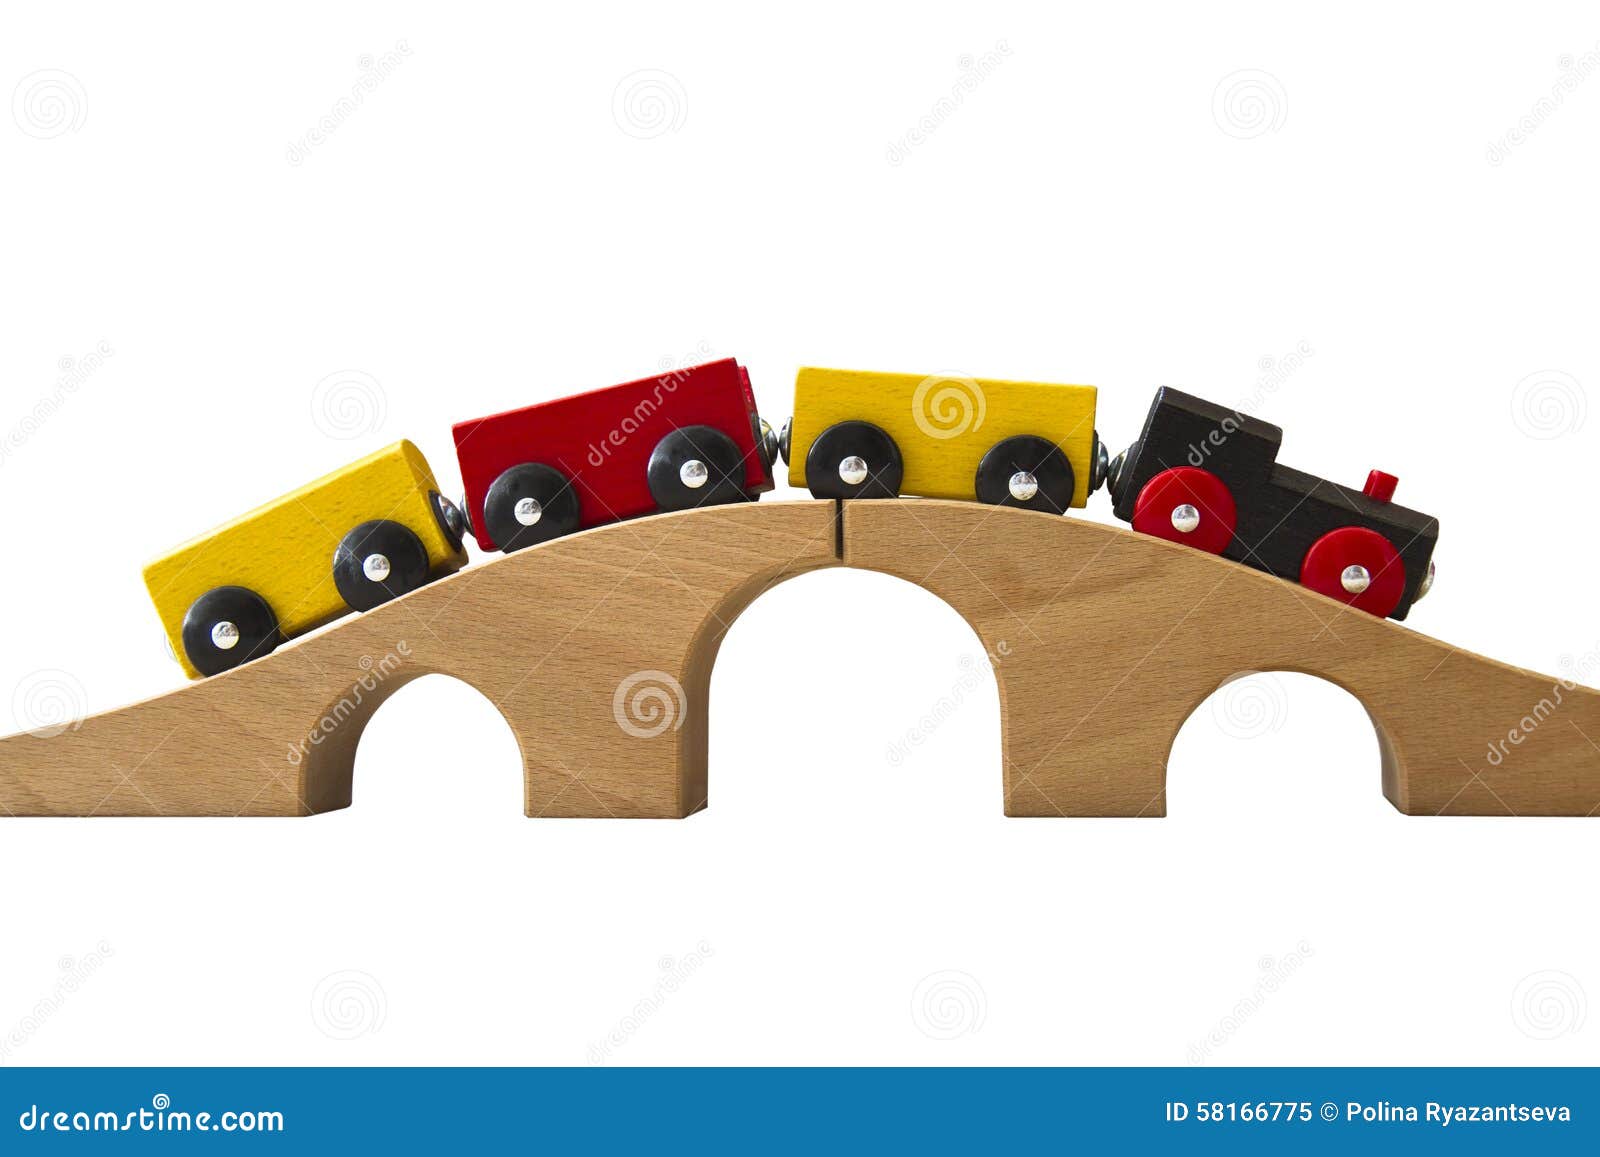 Stock Photo: Wooden toy train